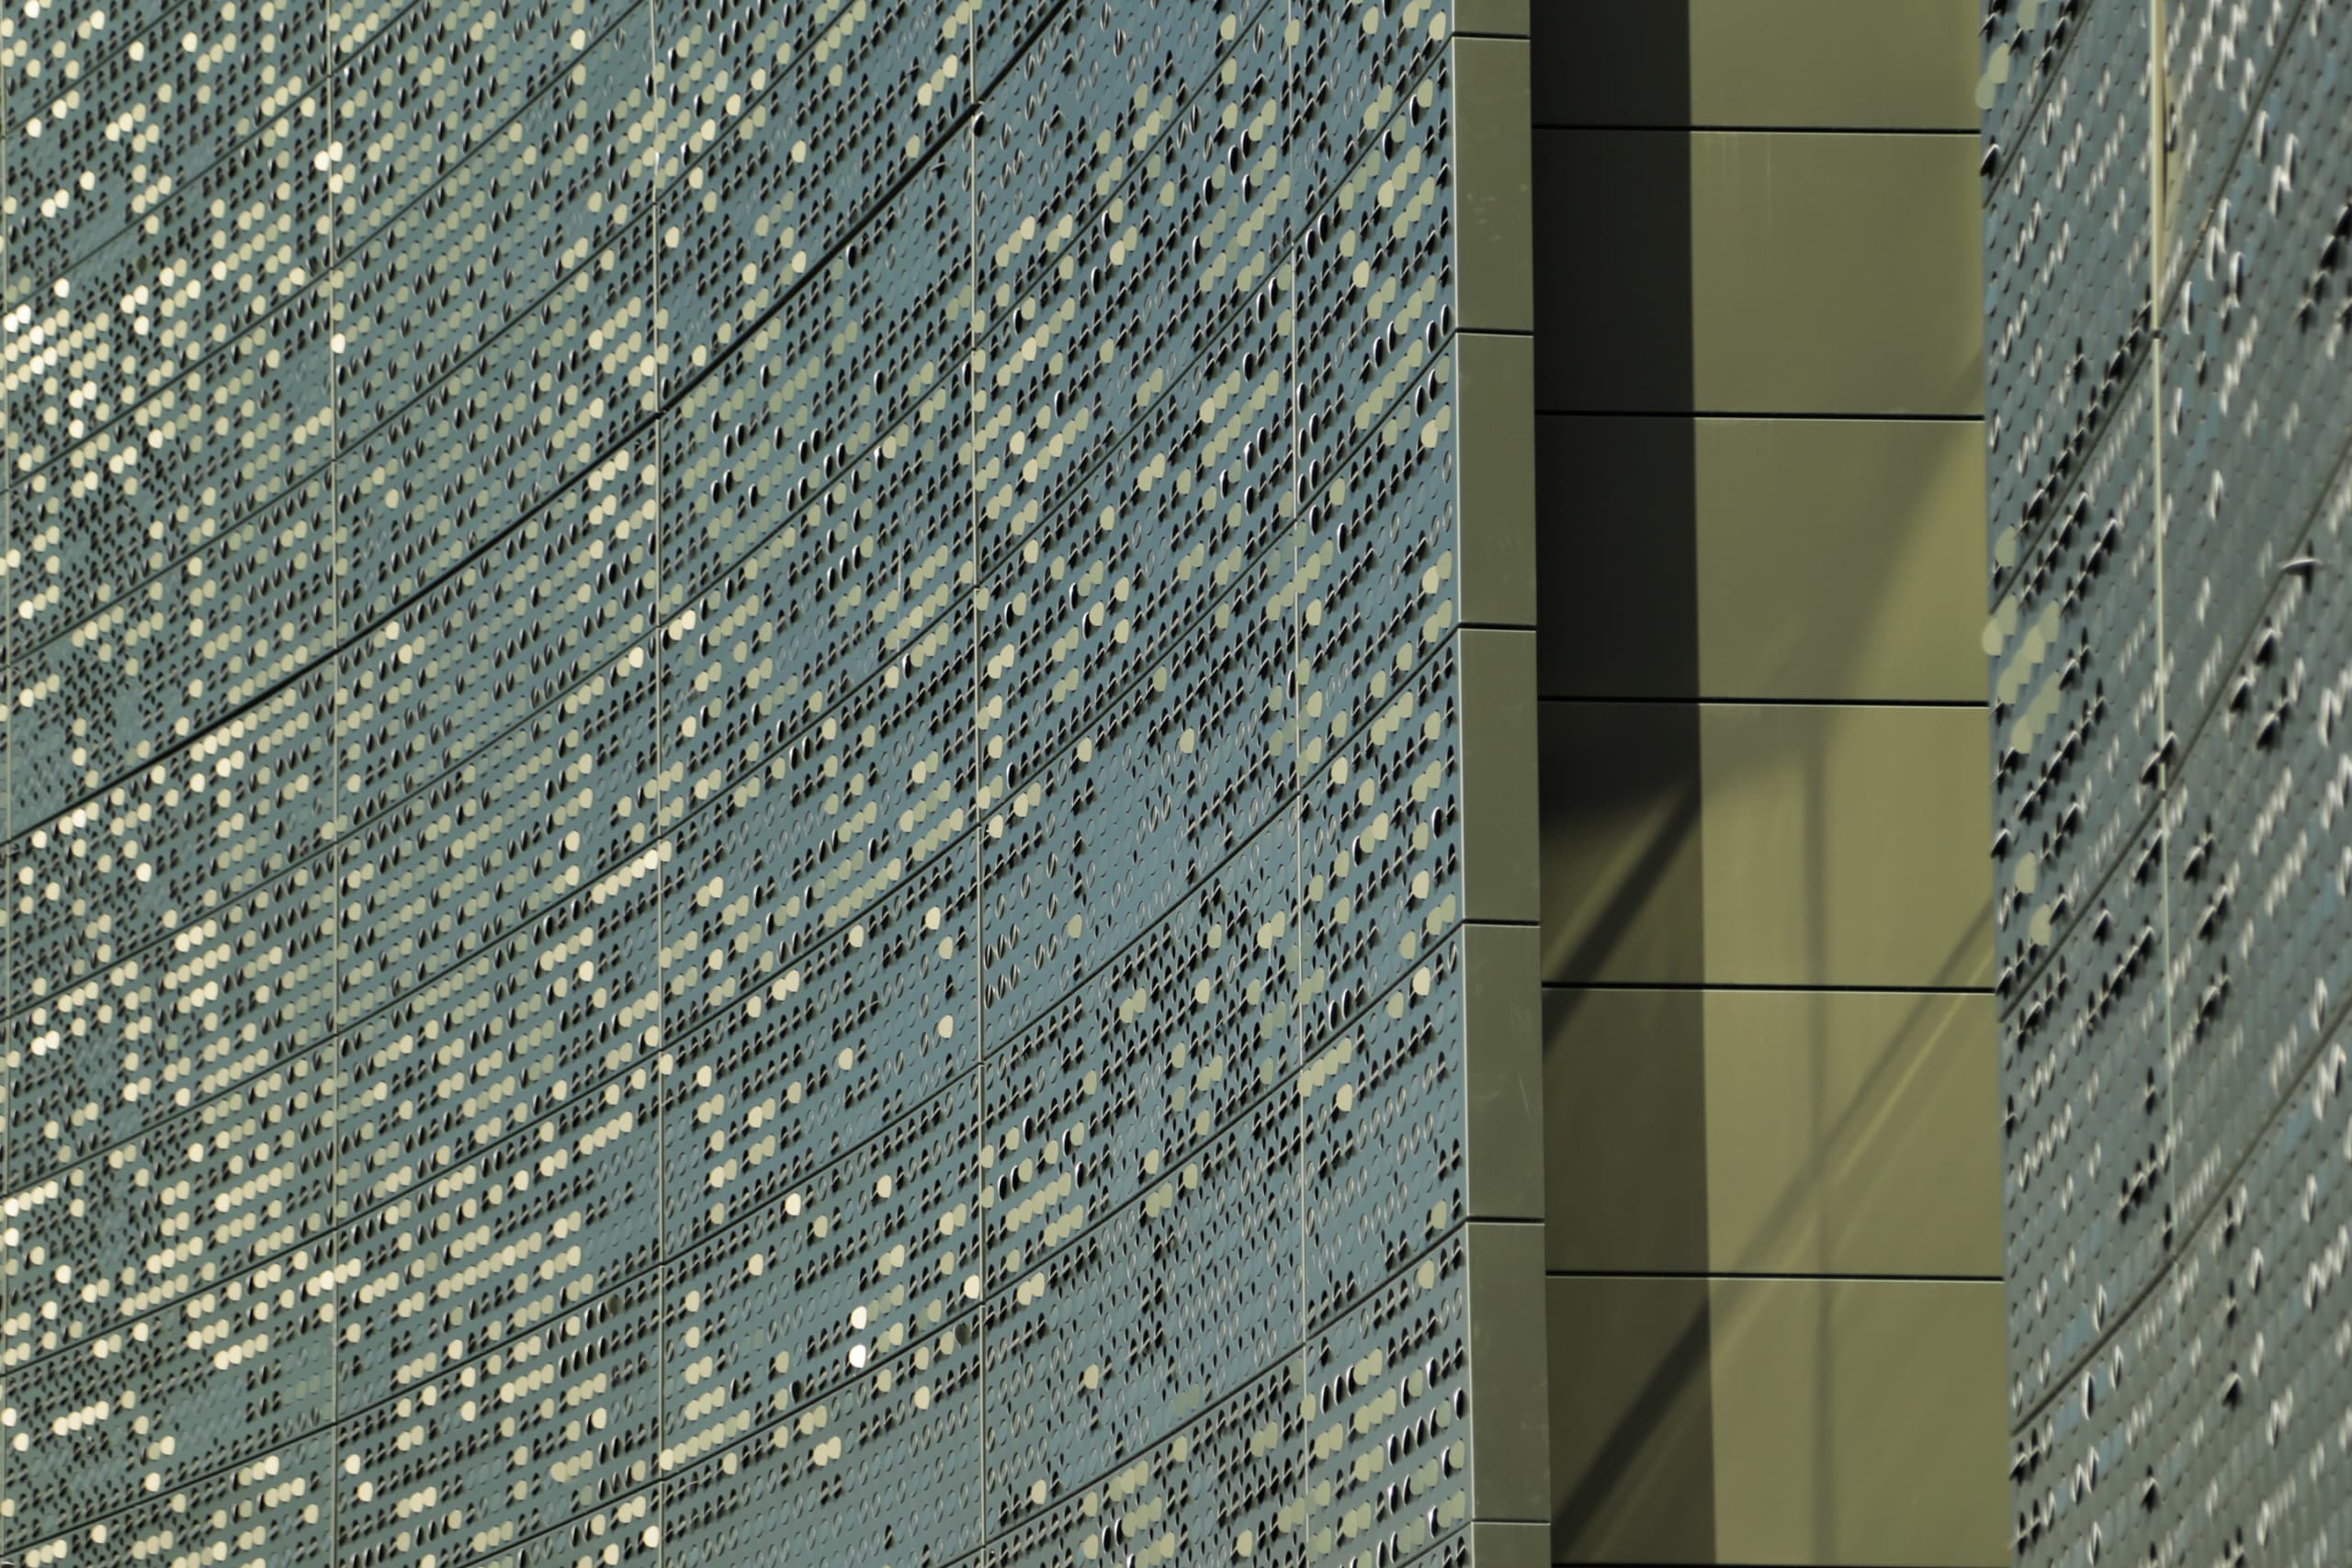 Detail of the louvered perforation patterns on color-shift iridescent painted aluminum panels.